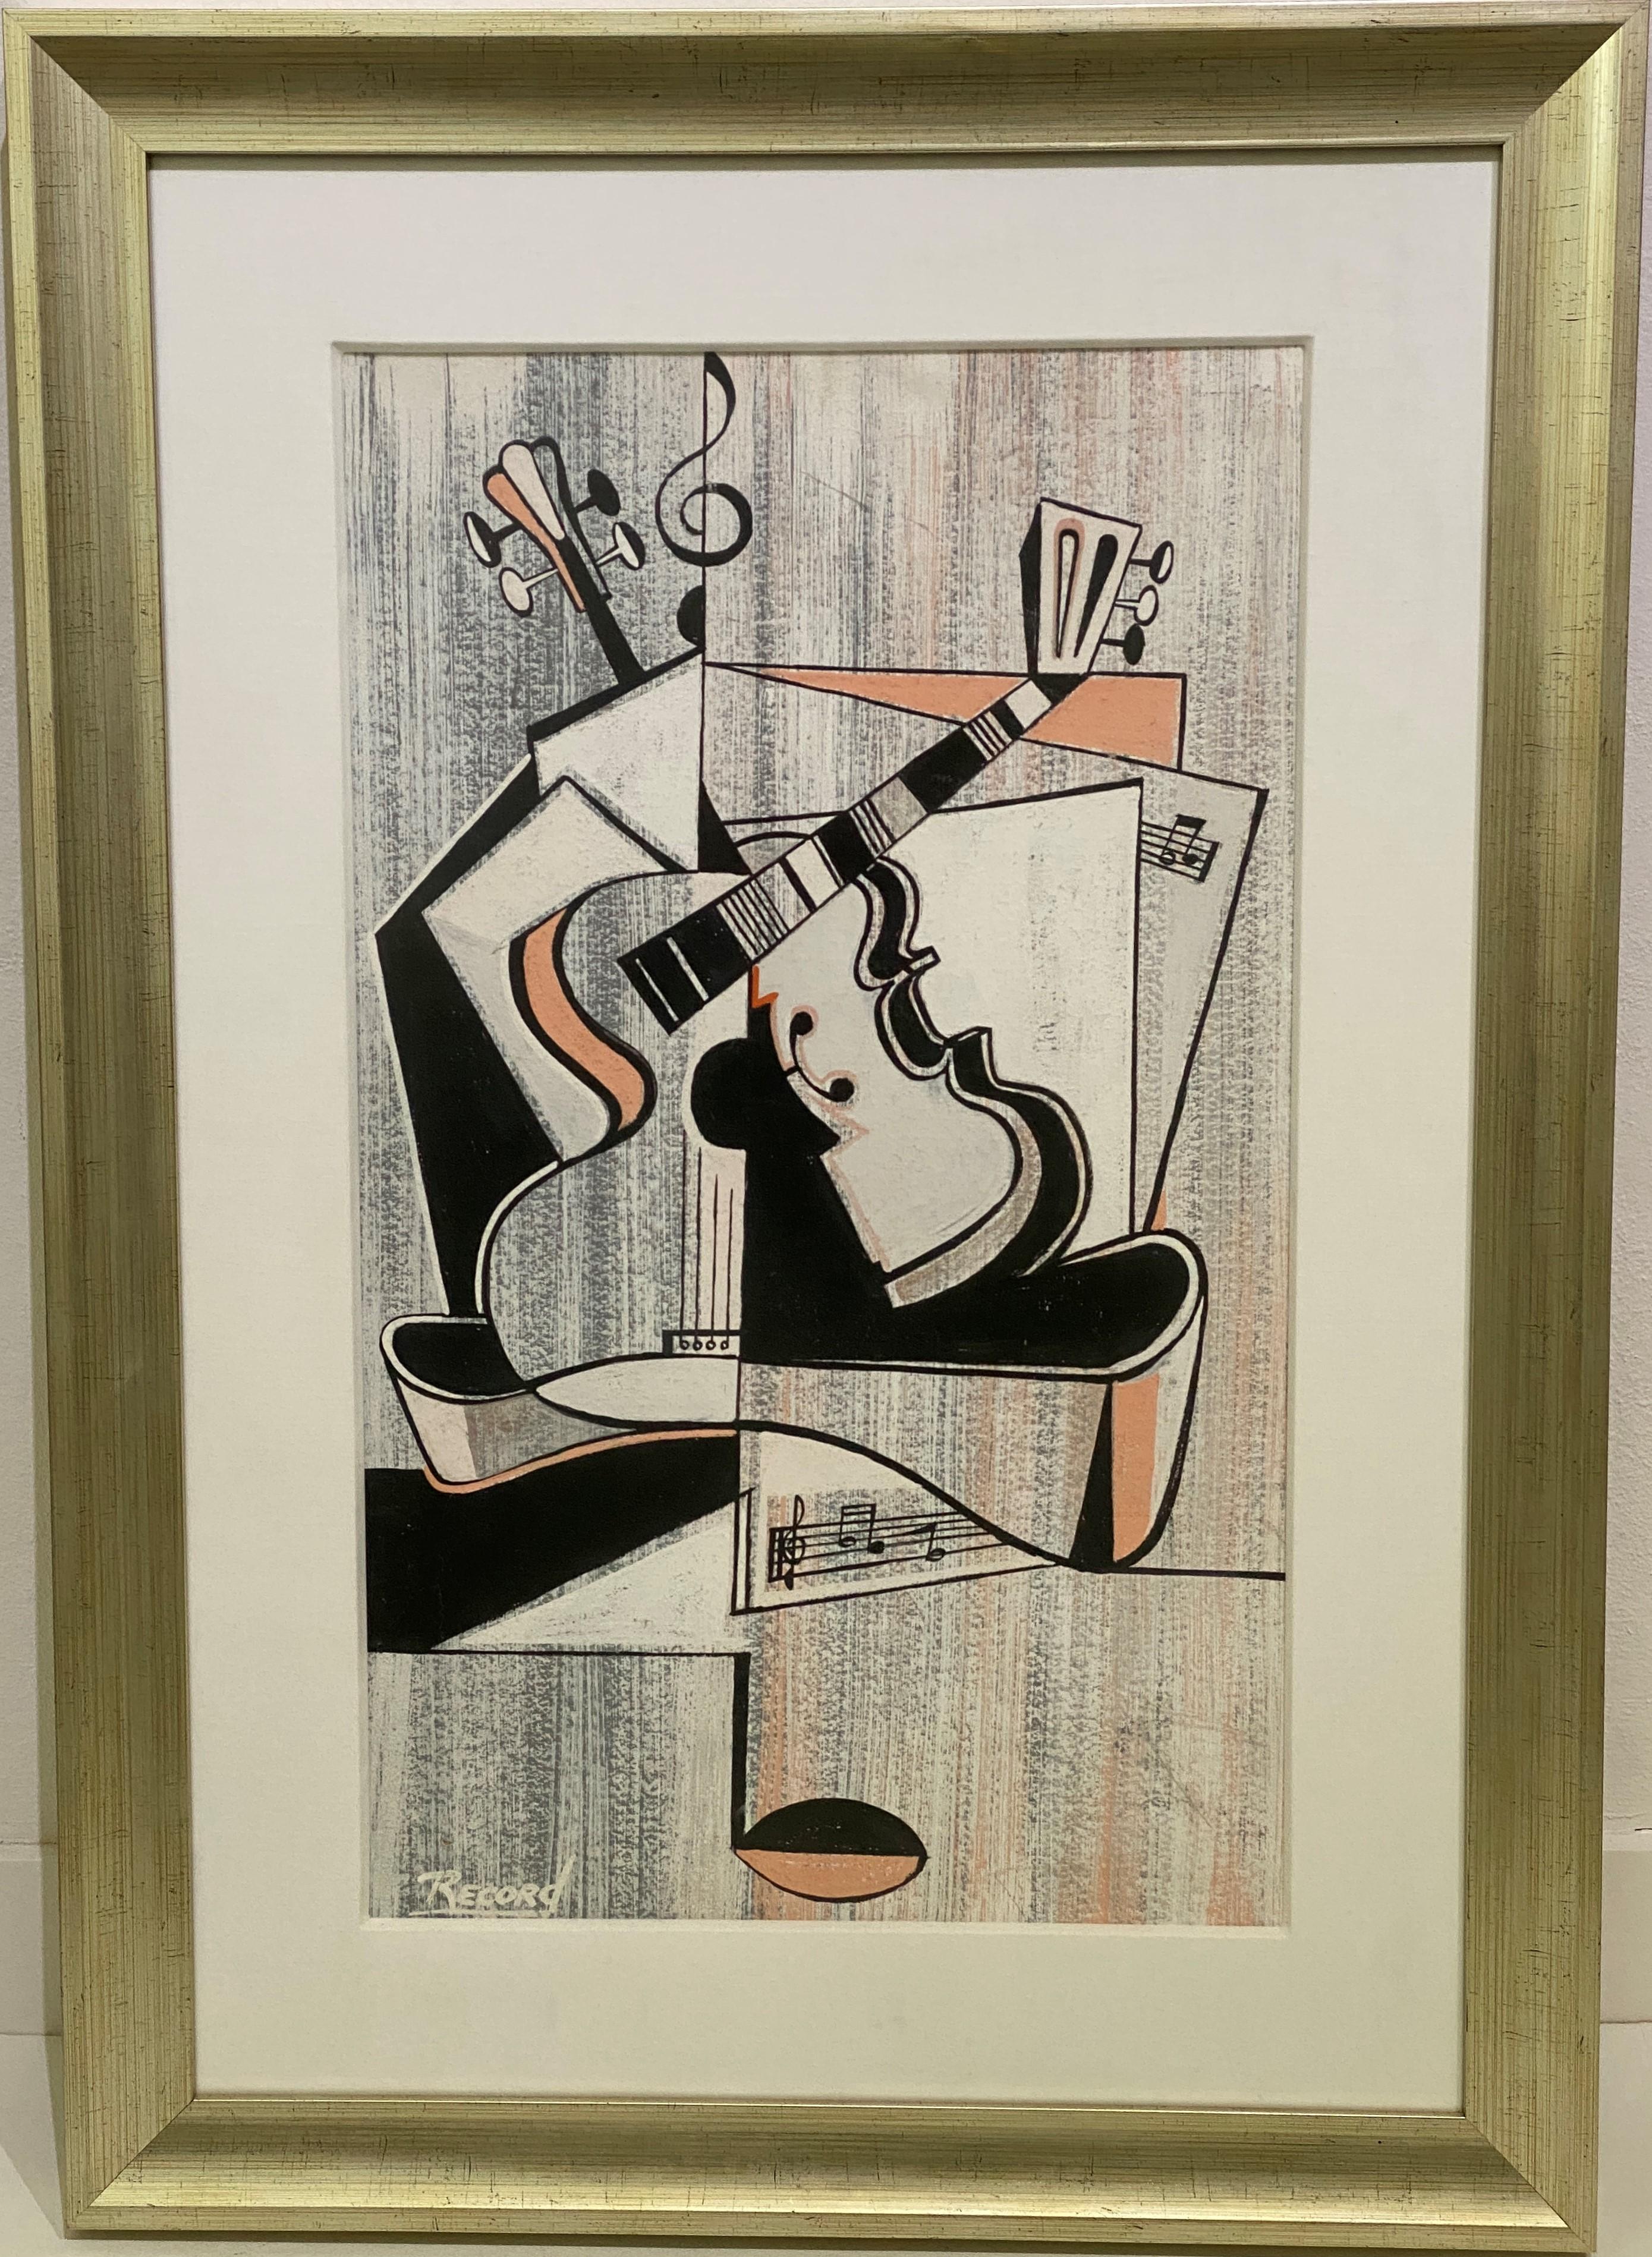 This Mid-Century Modern artwork was created by the artist Record. Here the artist has captured the guitar and musical notes with their cubist interpretation in the pastel medium.

A striped background was first freely applied with grey and coral